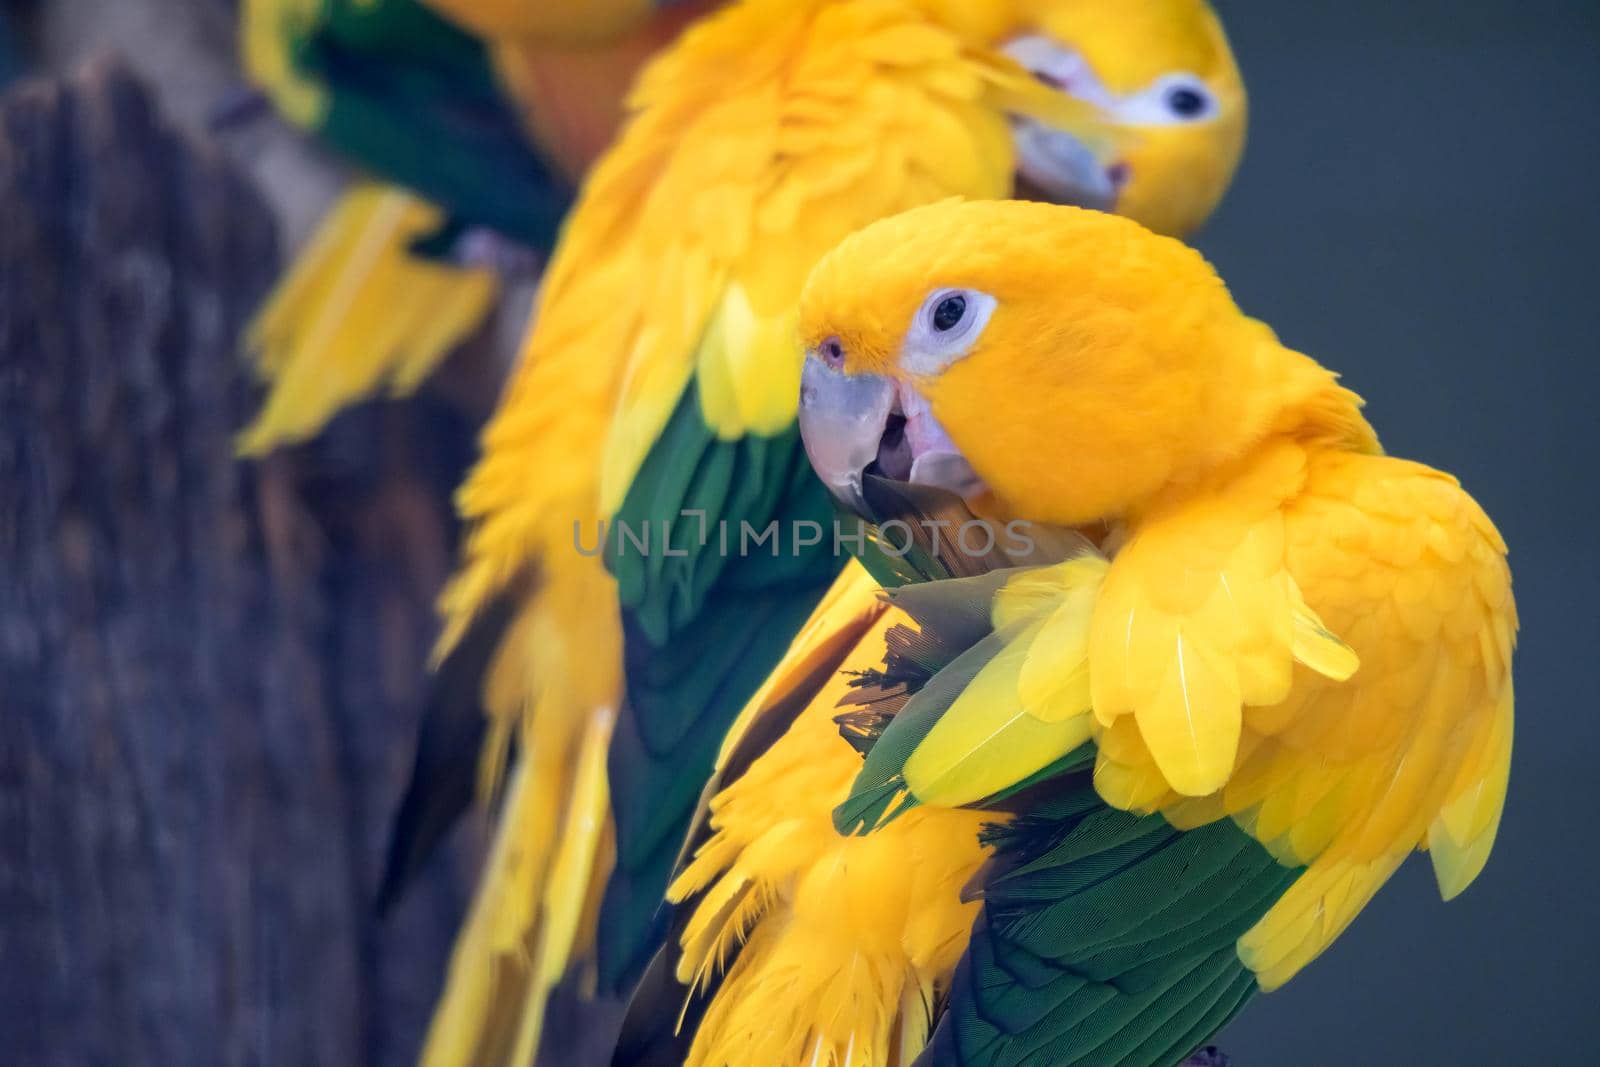 Lovely sun conure parrot birds on the perch. flock of colorful sun conure parrot birds interacting.  by billroque